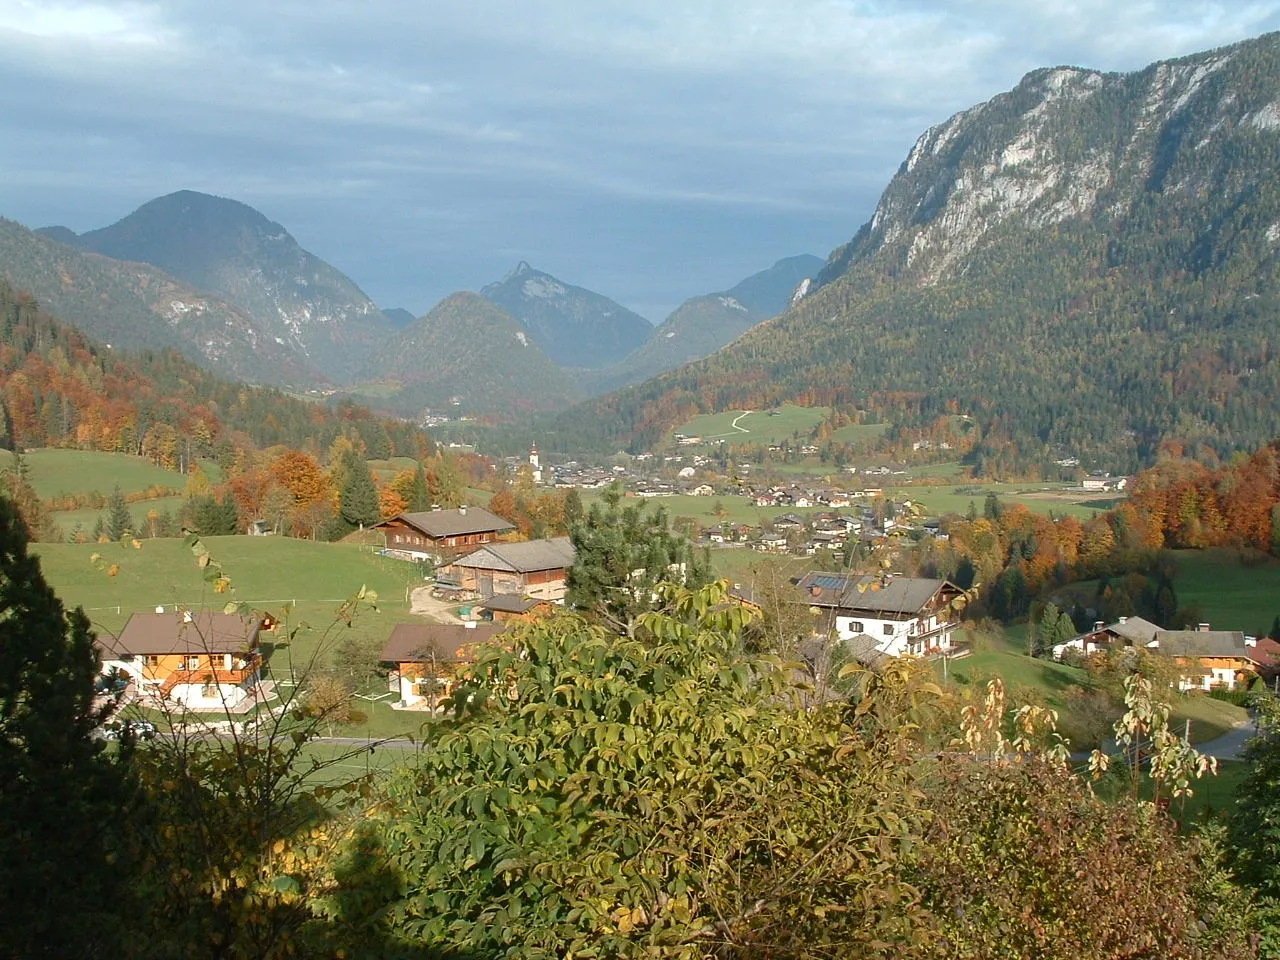 Photo showing: Overview Unken, Austria

Photographed by Gakuro